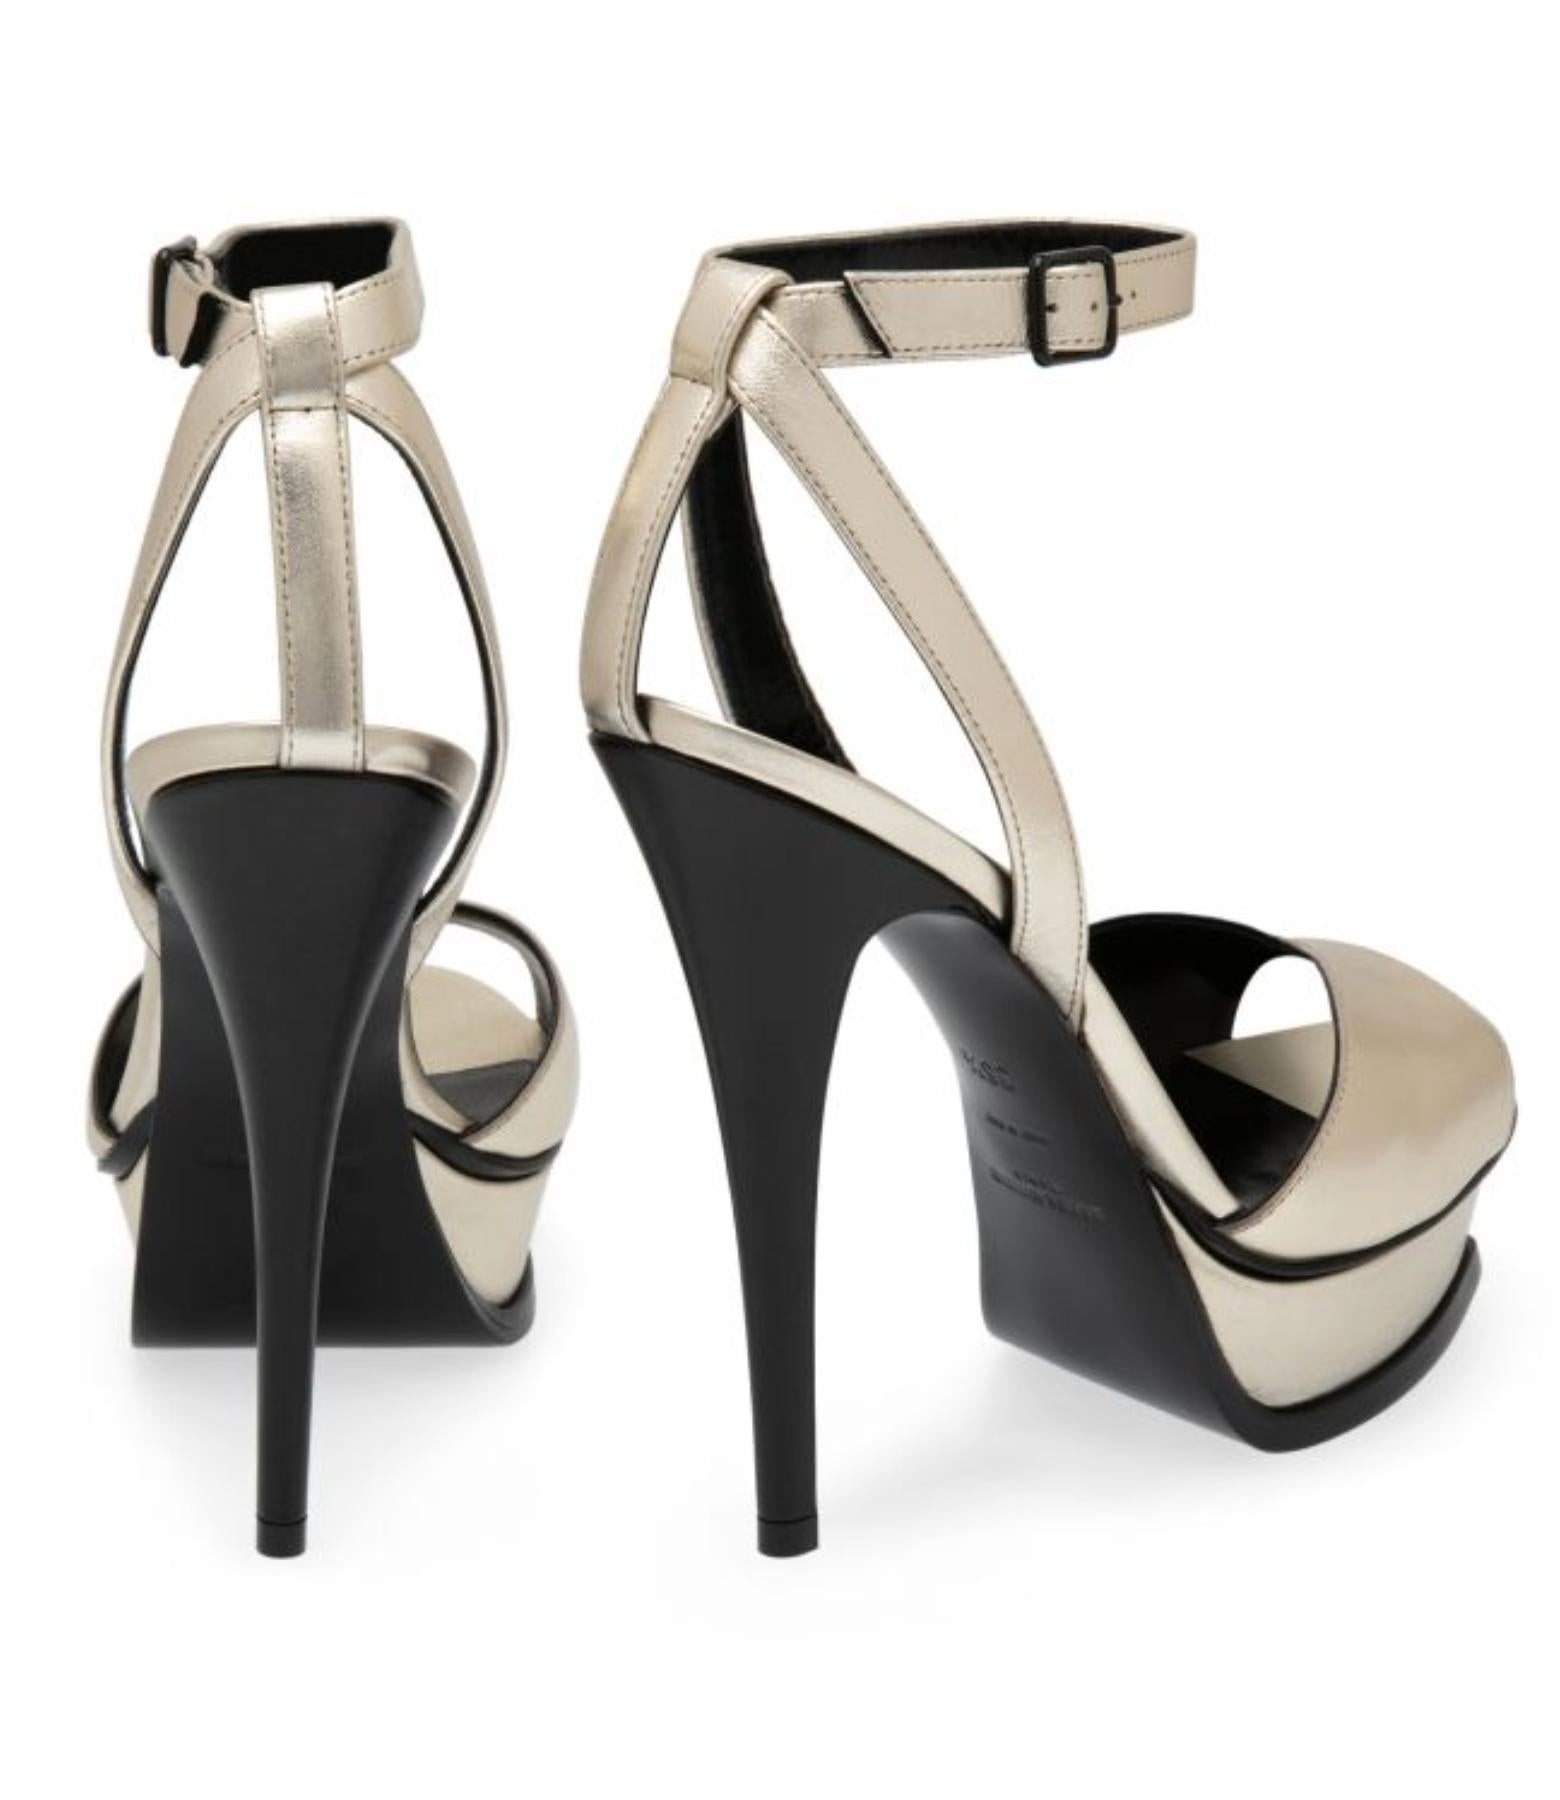 Saint Laurent Champagne Gold Leather Tribute 105 Stiletto Heel Sandal

Instantly recognisable as the works of Saint Laurent, these Tribute sandals are a signature style. Made from premium metallic leather, they come with all the key features